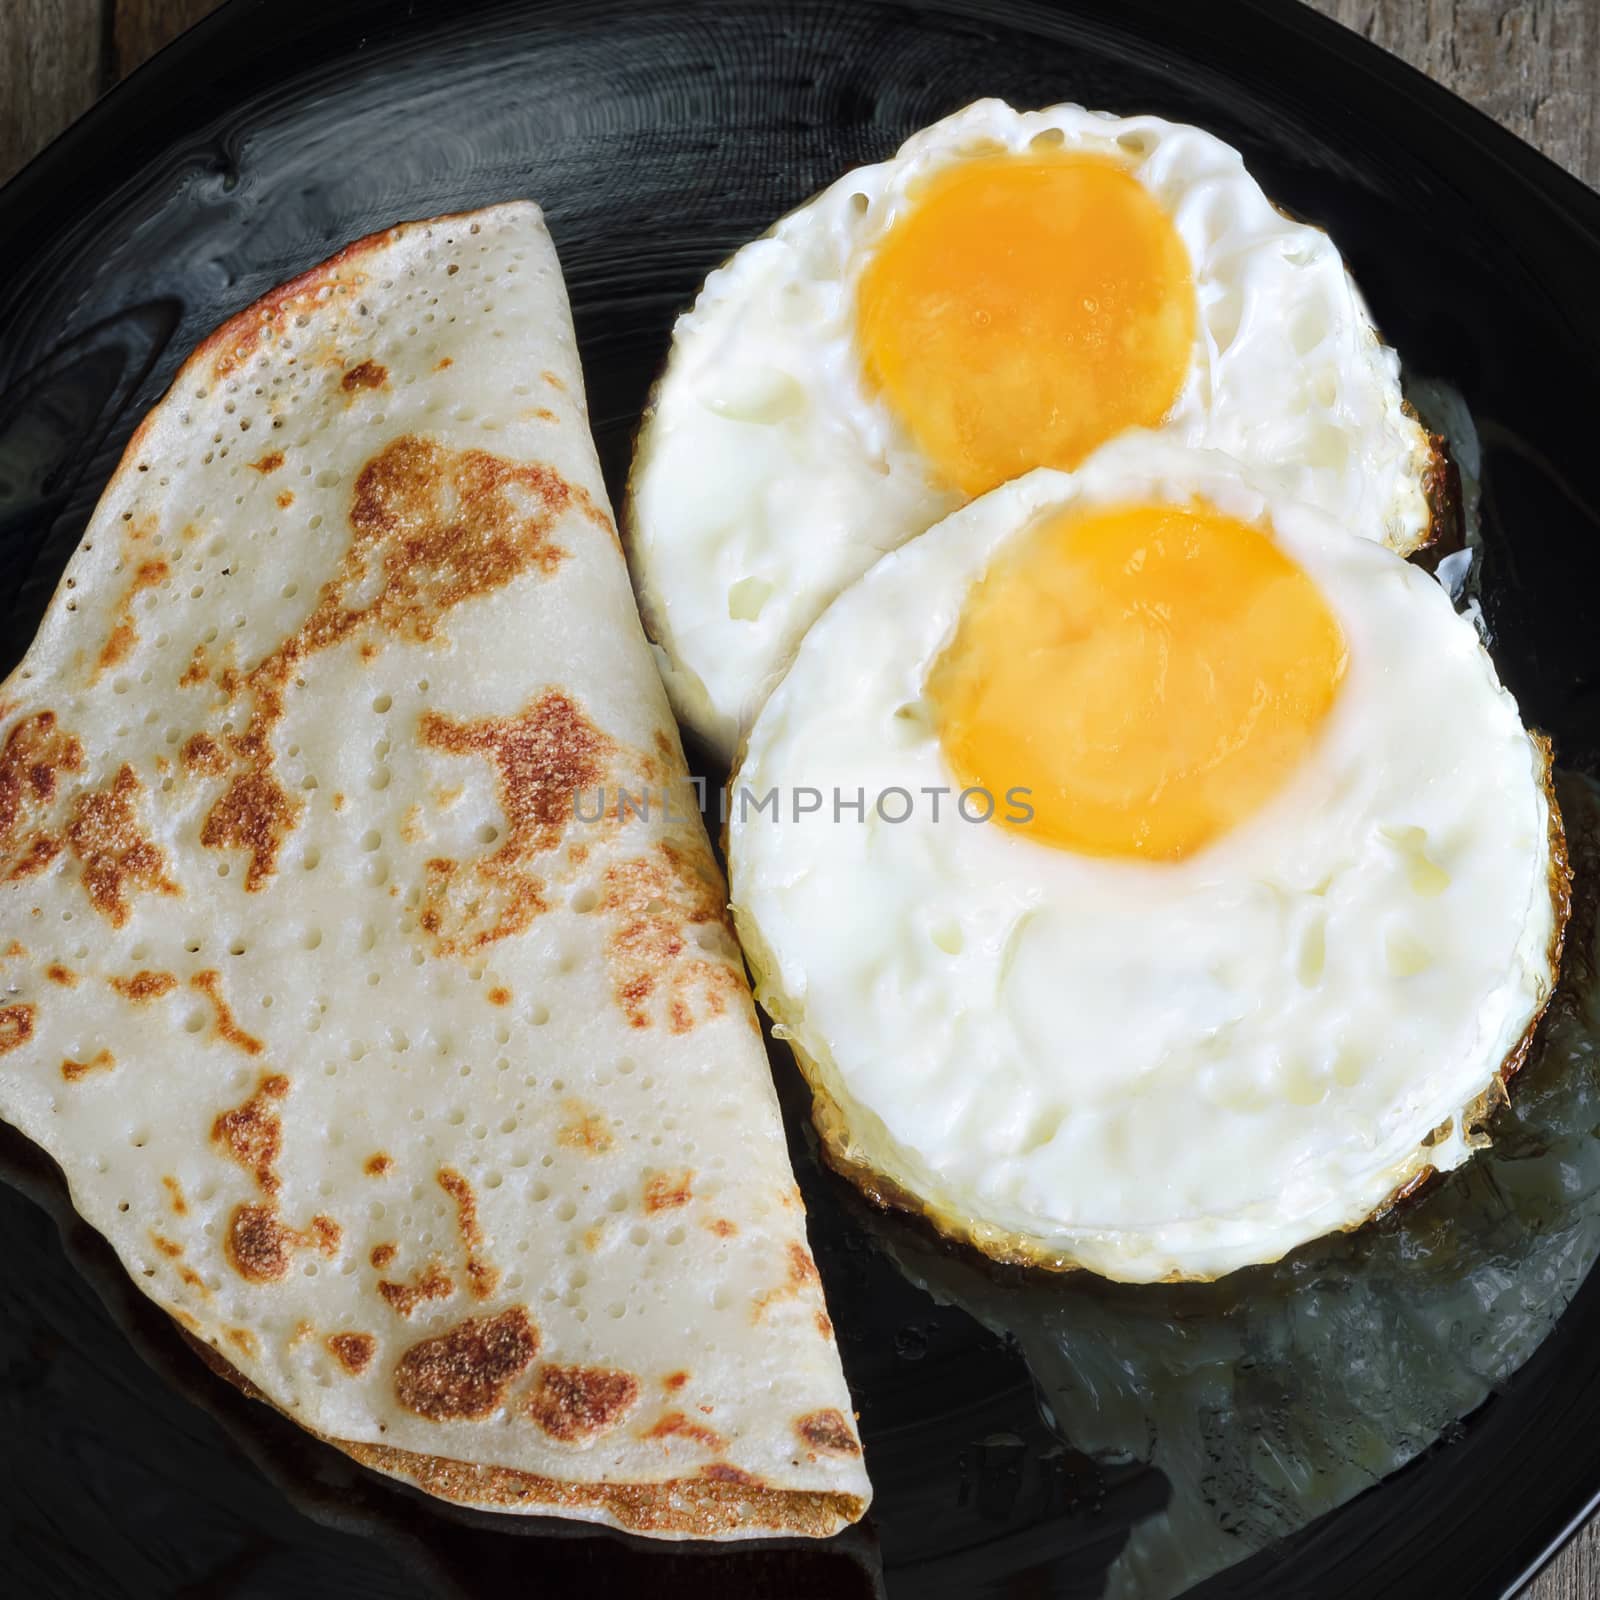 Two fried eggs and pancakes on a black glass plate, close-up